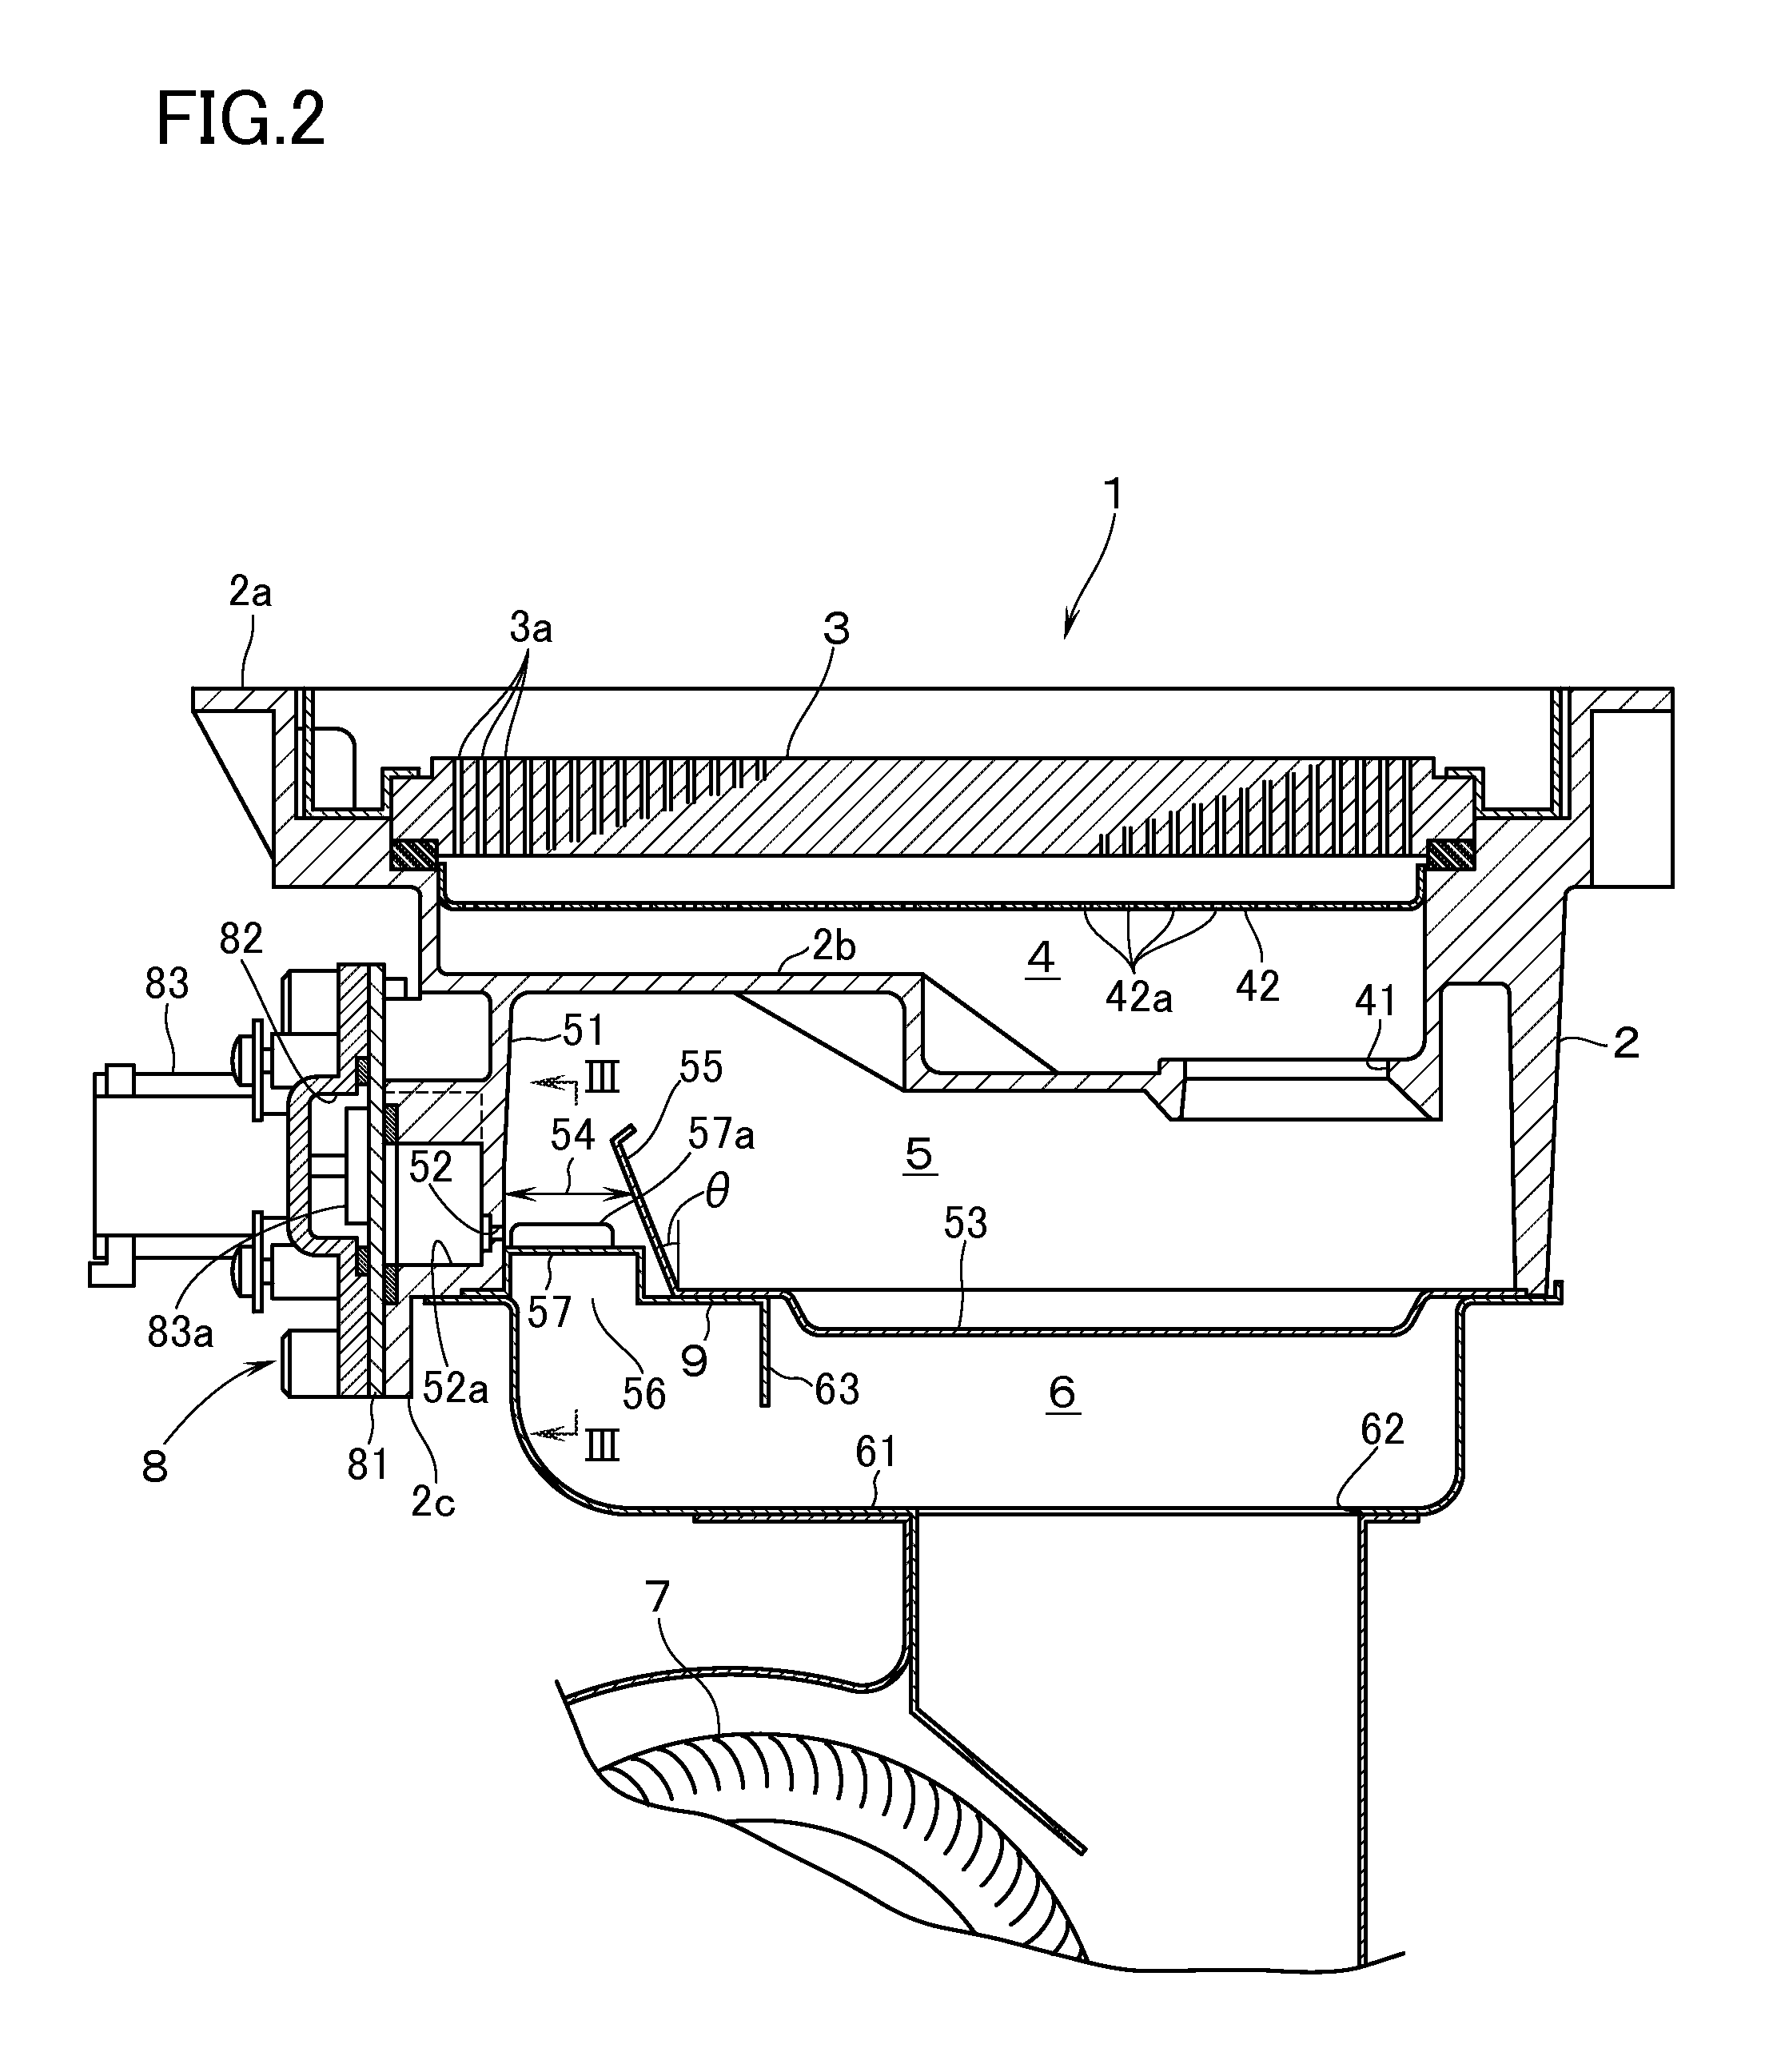 Totally aerated combustion burner